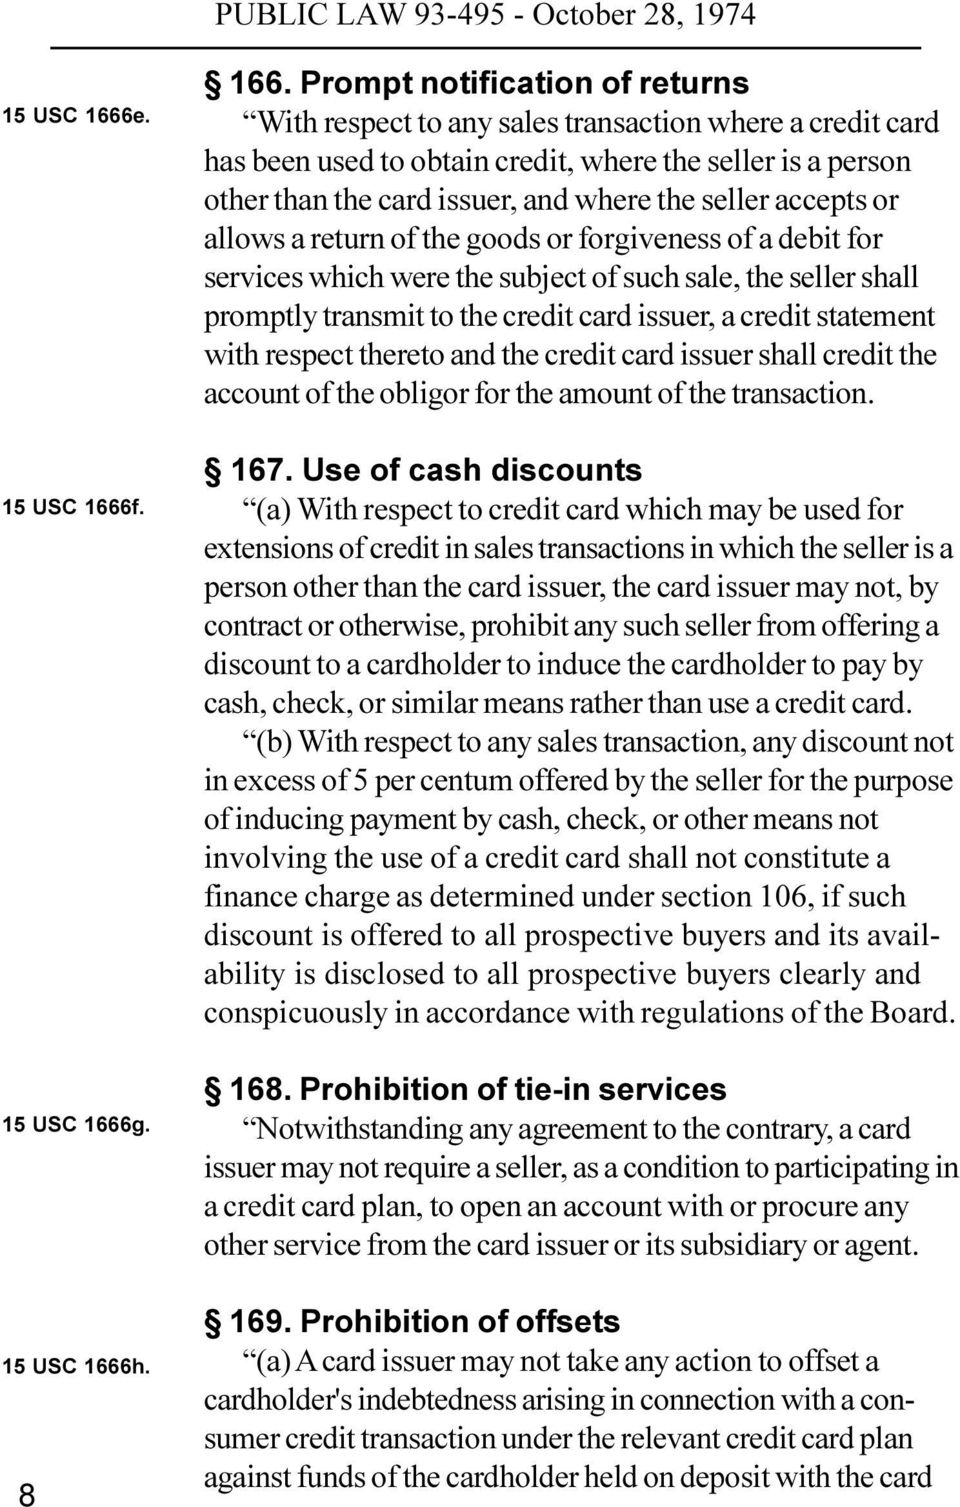 accepts or allows a return of the goods or forgiveness of a debit for services which were the subject of such sale, the seller shall promptly transmit to the credit card issuer, a credit statement